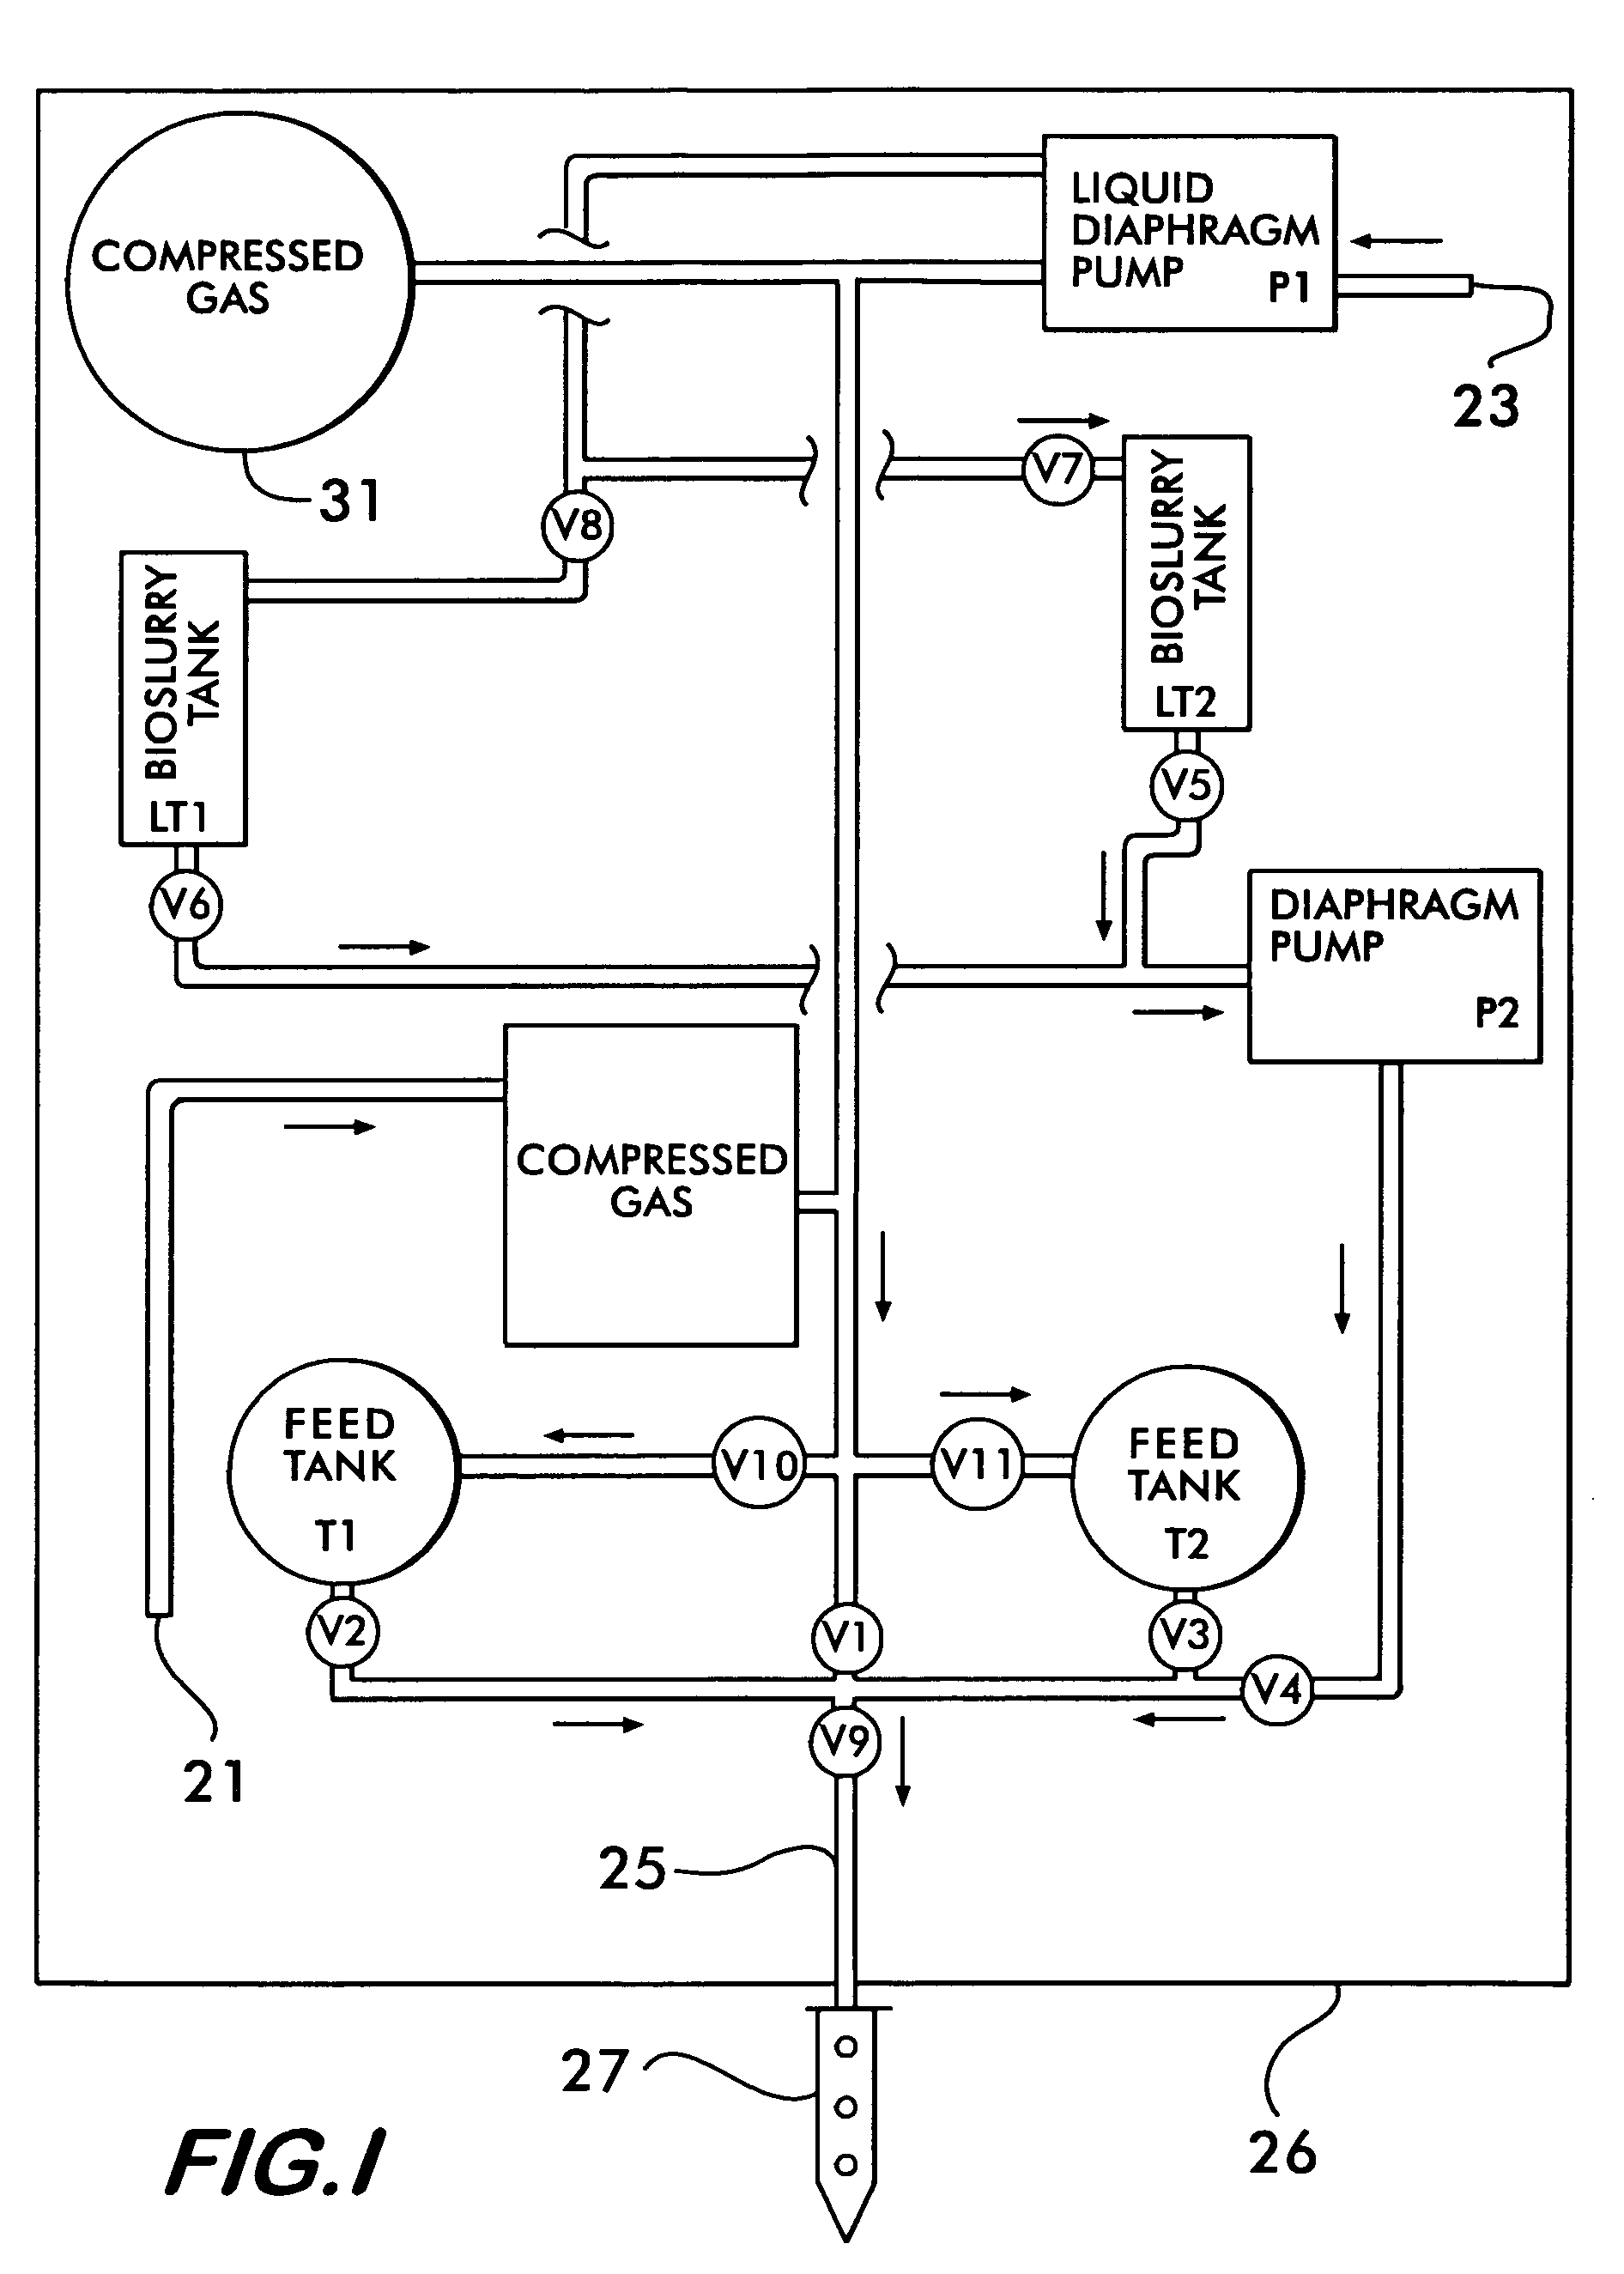 Apparatus for in-situ remediation using a closed delivery system